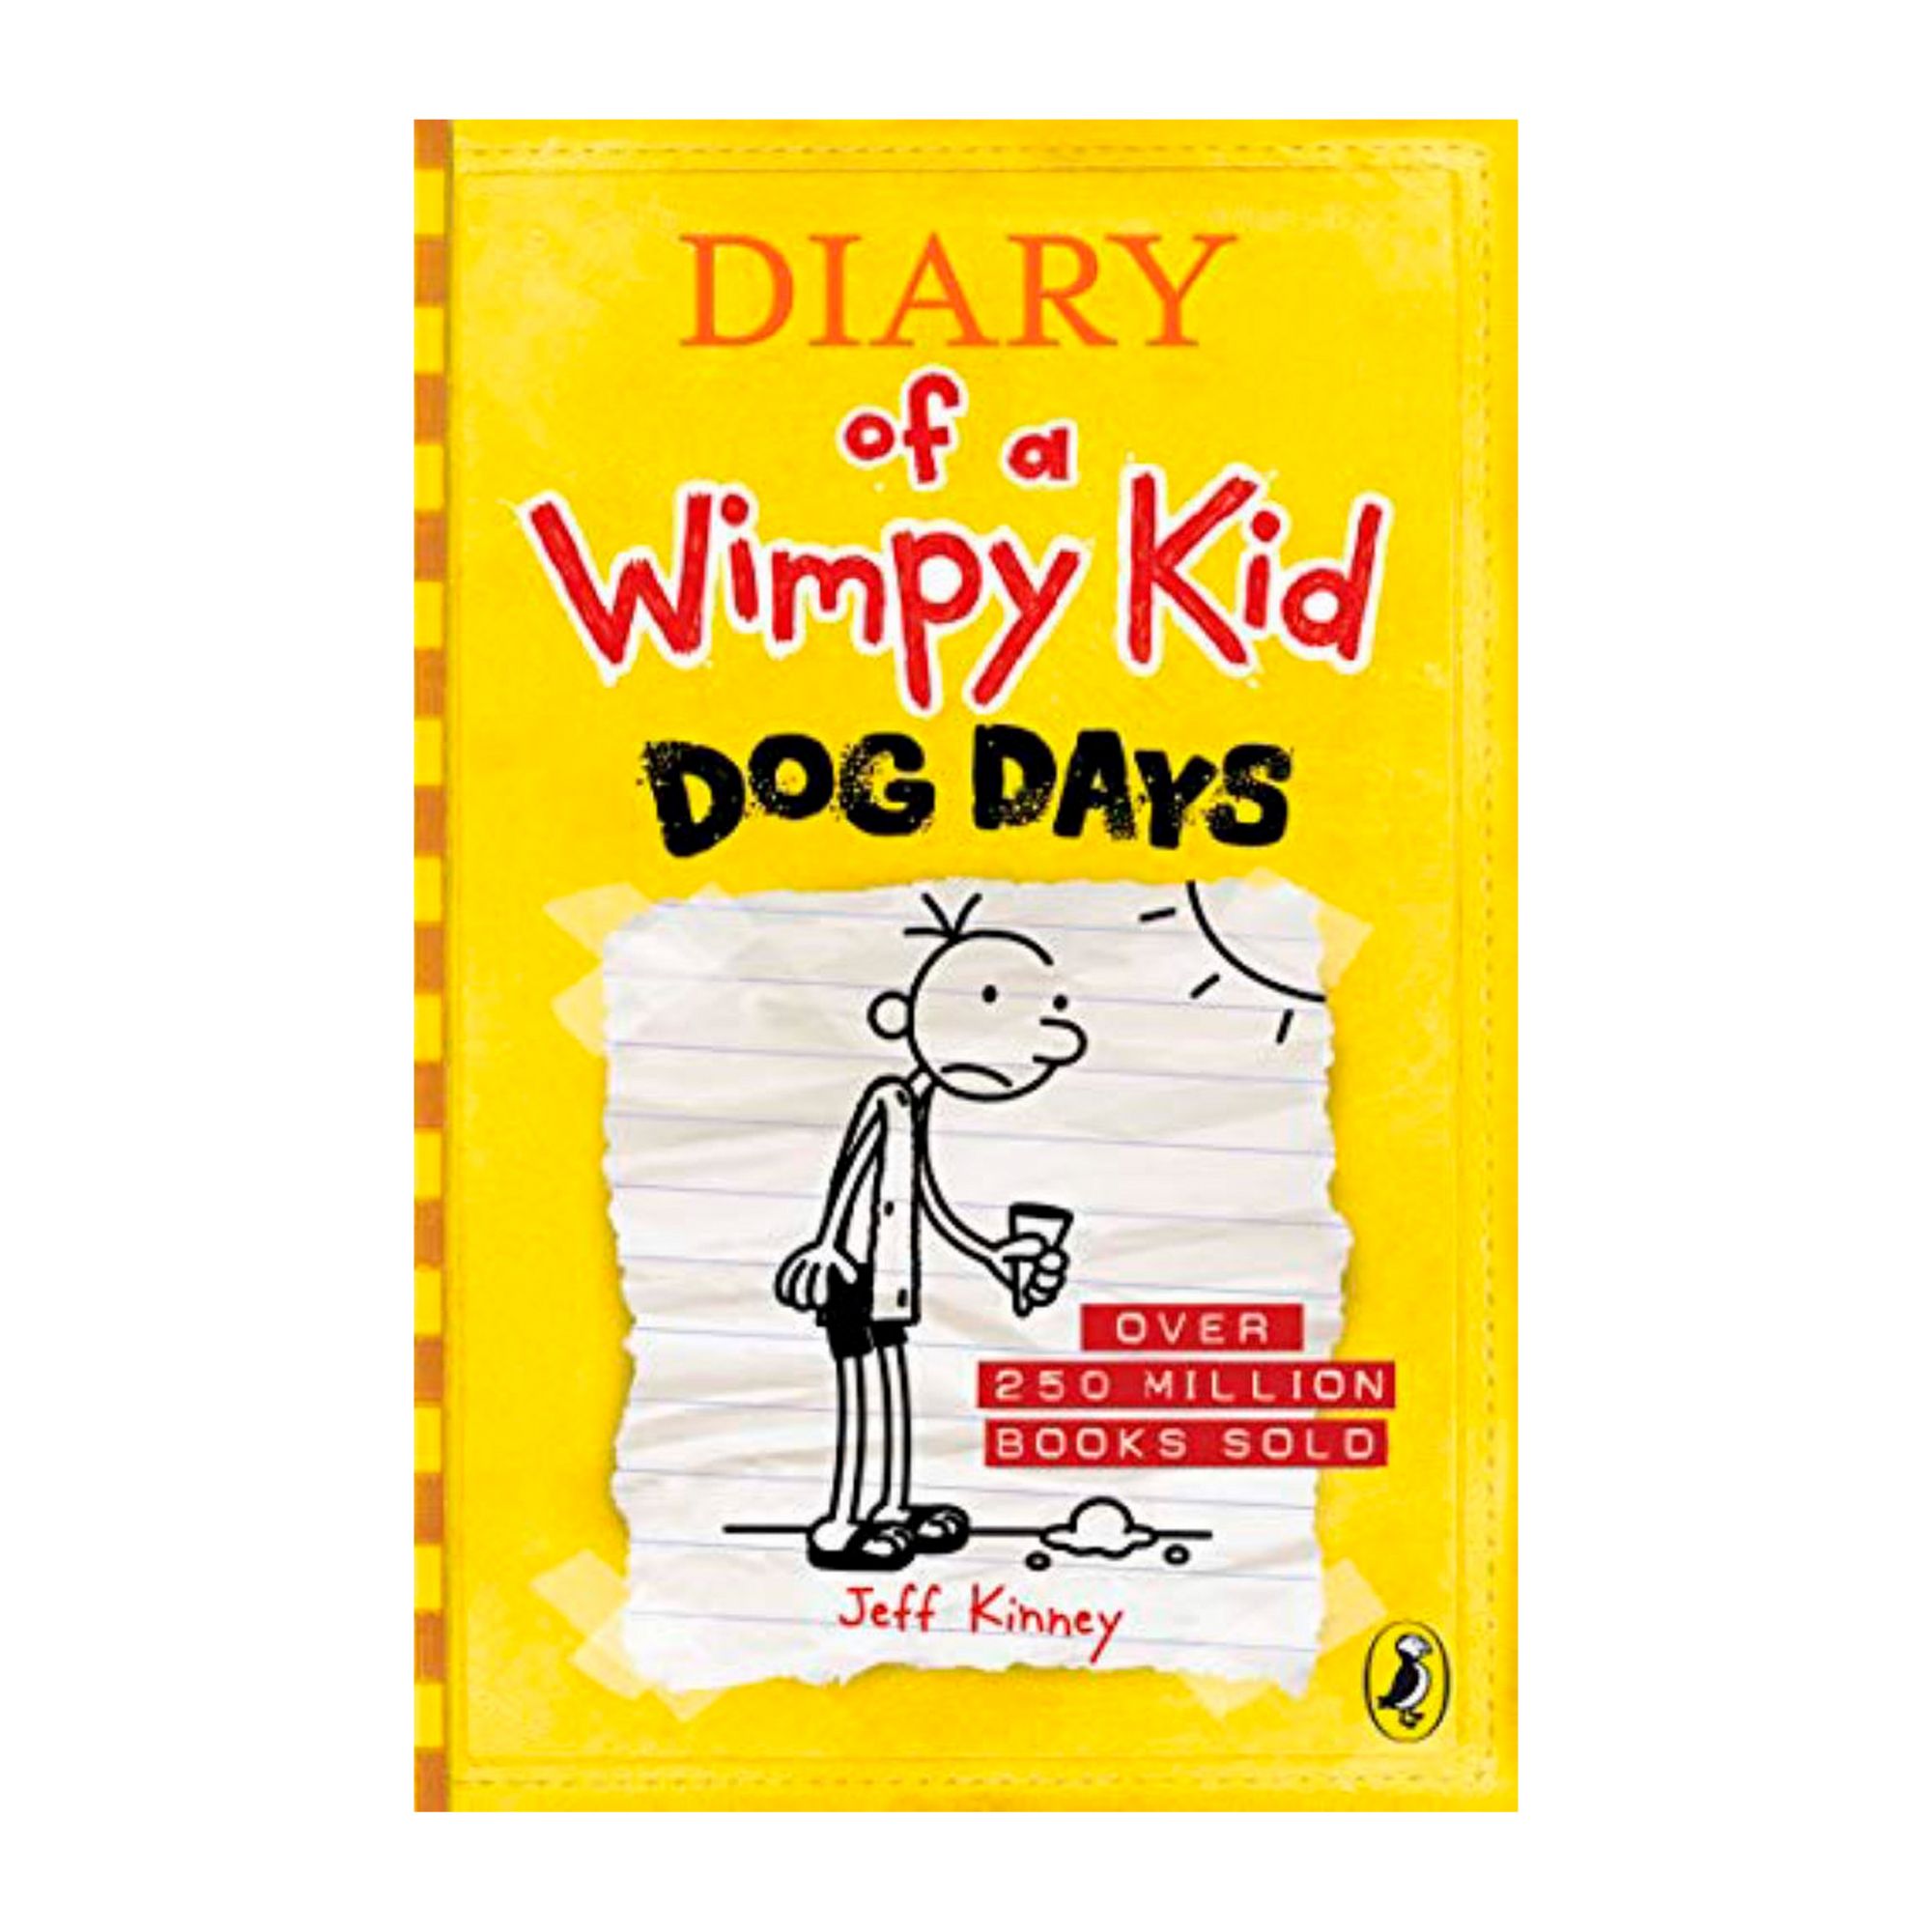 Dog Days (Diary of a Wimpy Kid #4) 